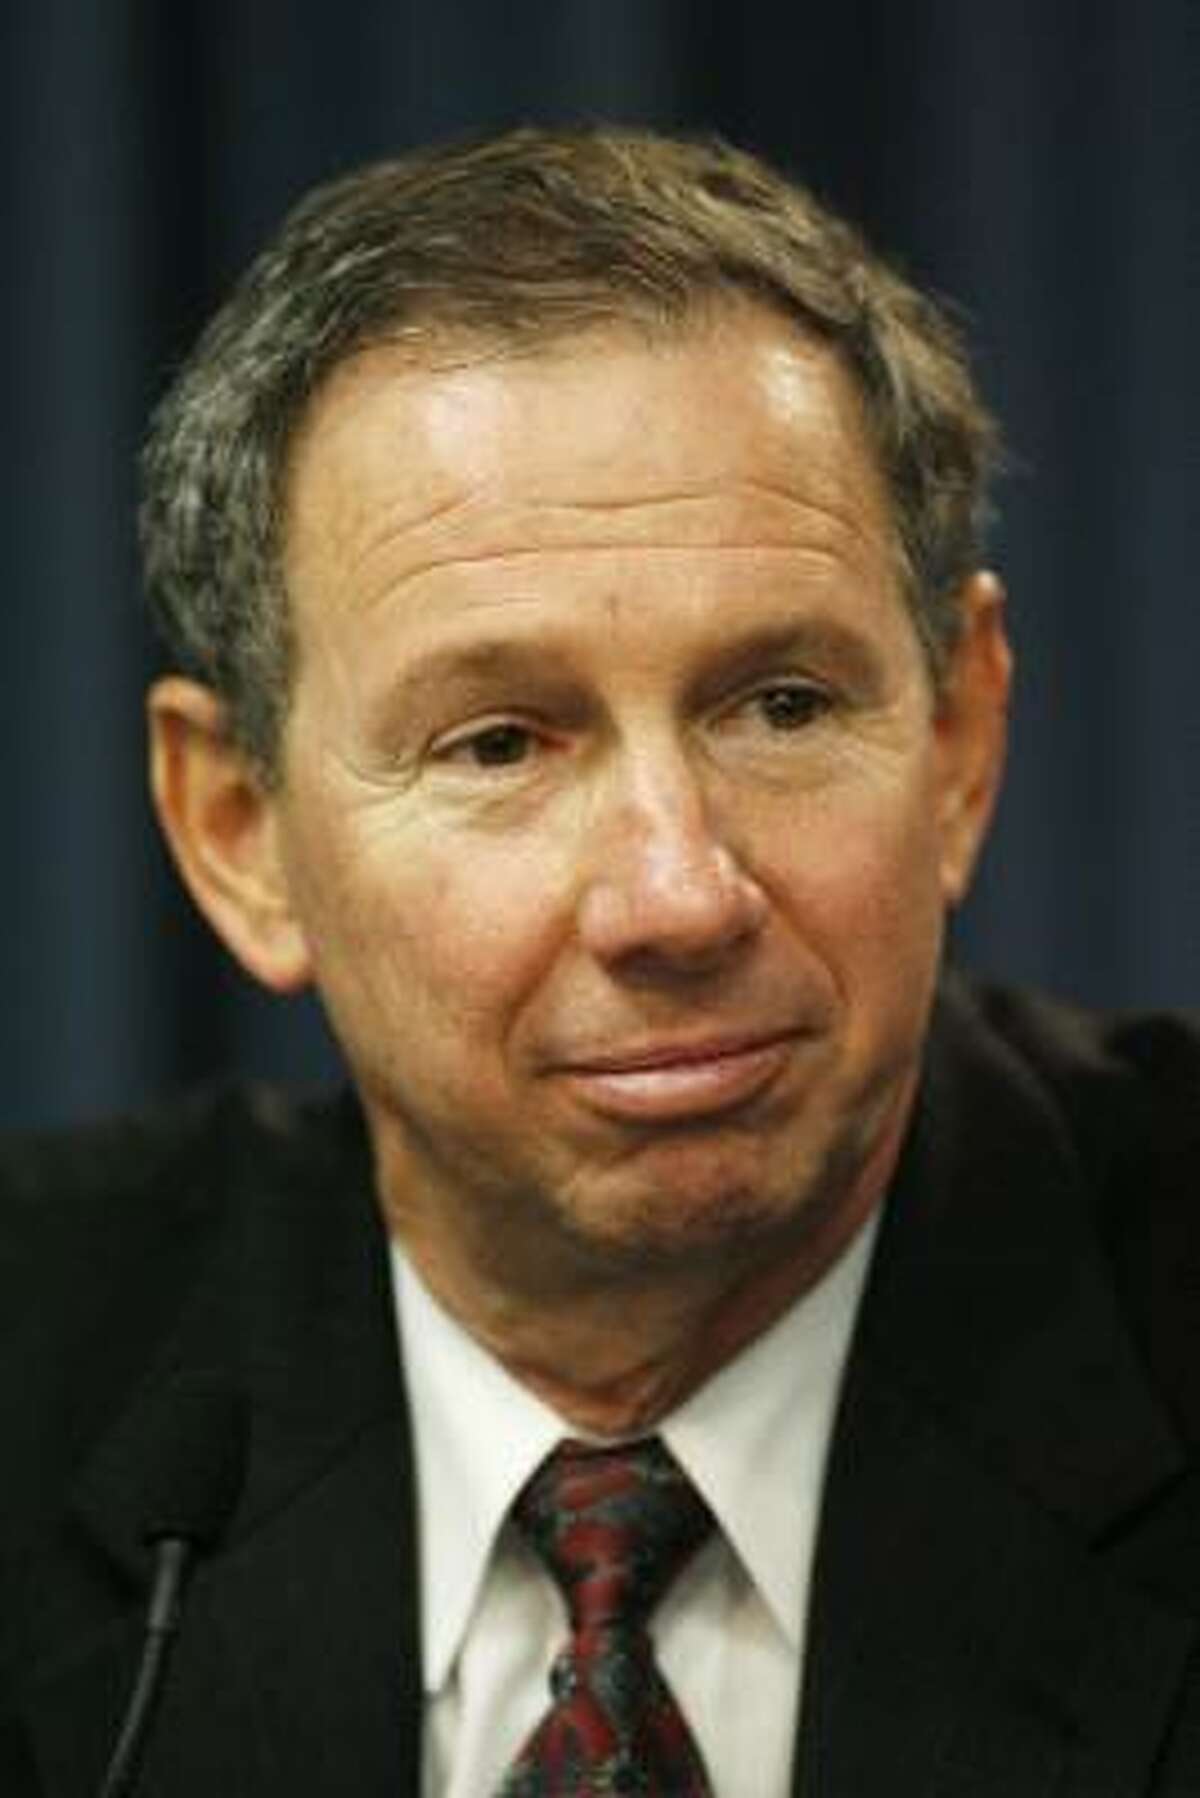 NASA Administrator Michael Griffin, shown in this 2006 file photo, said in a radio interview he is unsure whether mankind should be working on the global warming problem.